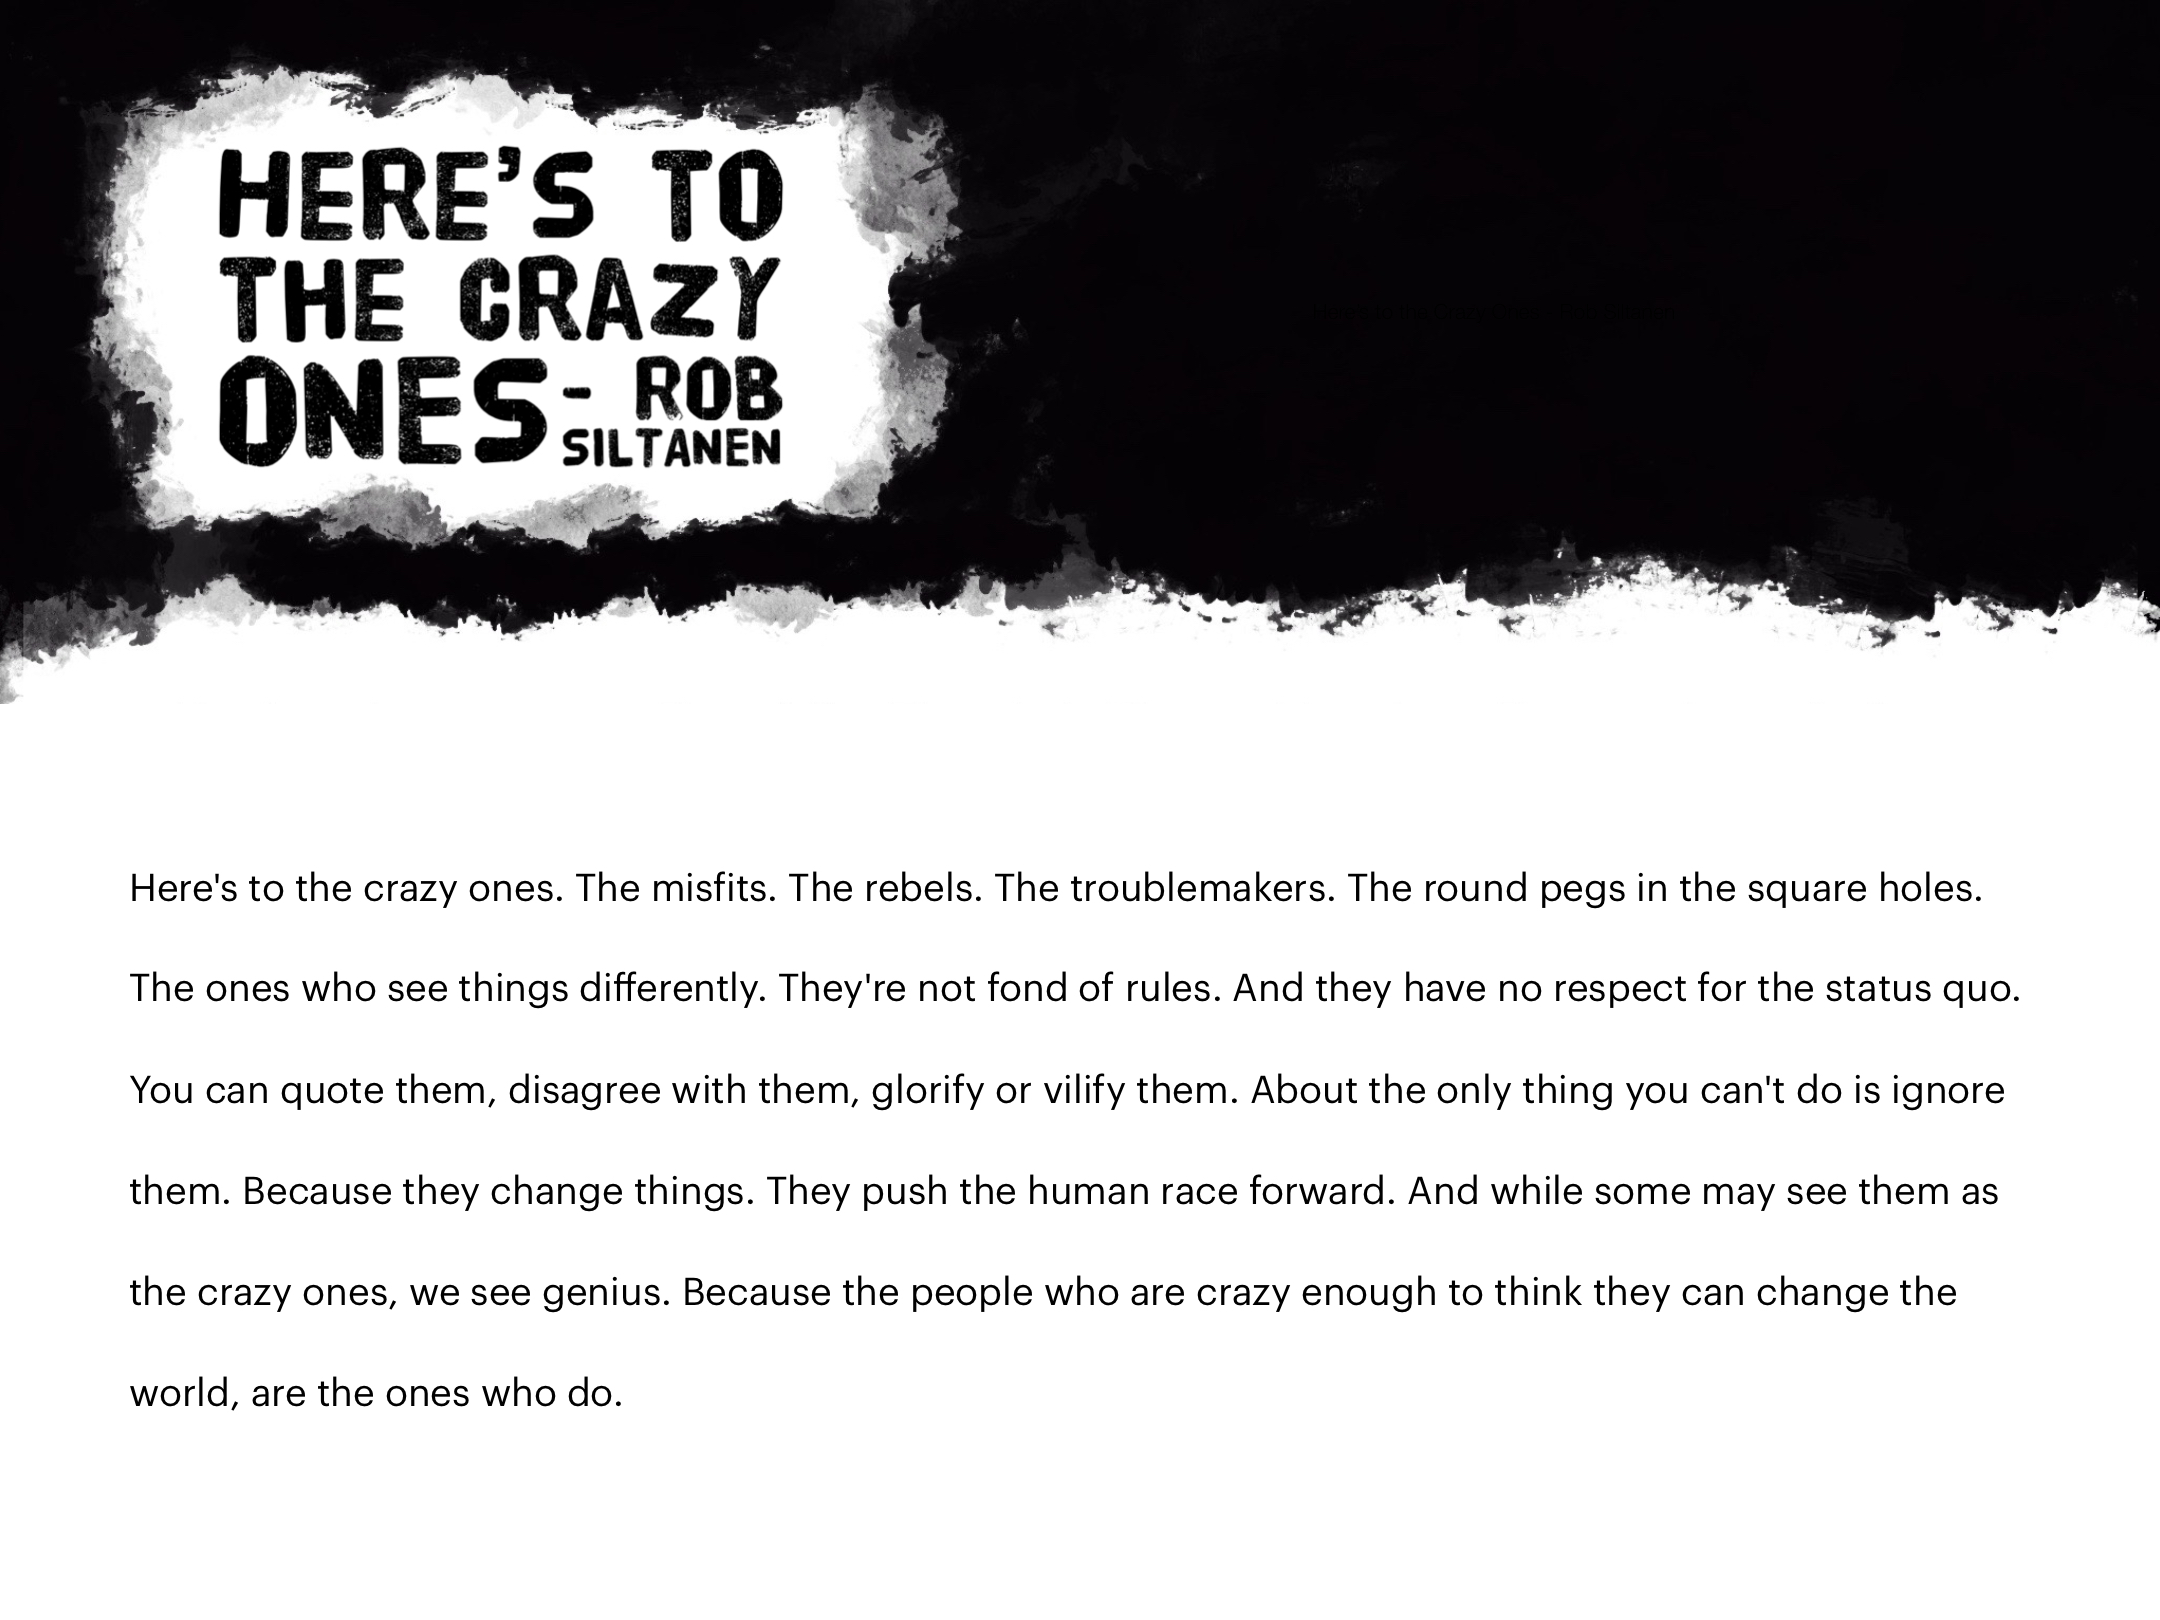 Screenshot from Blackout Recording, showing example text “Here’s to the Crazy Ones” by Rob Siltanen.